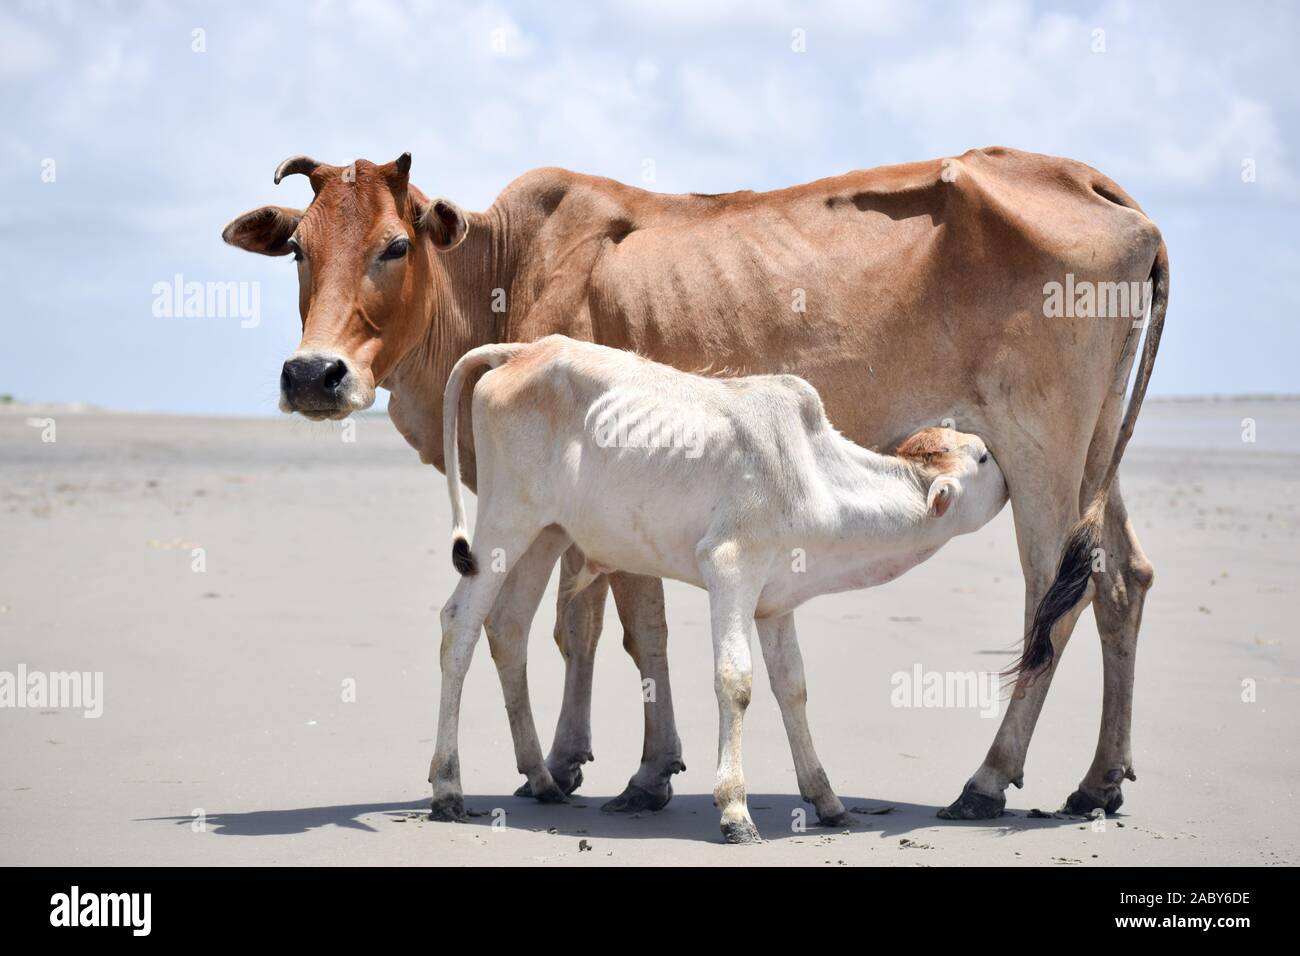 Cute Baby Calf Drinking Mothers Milk . Indian Cow Feeding Milk to ...